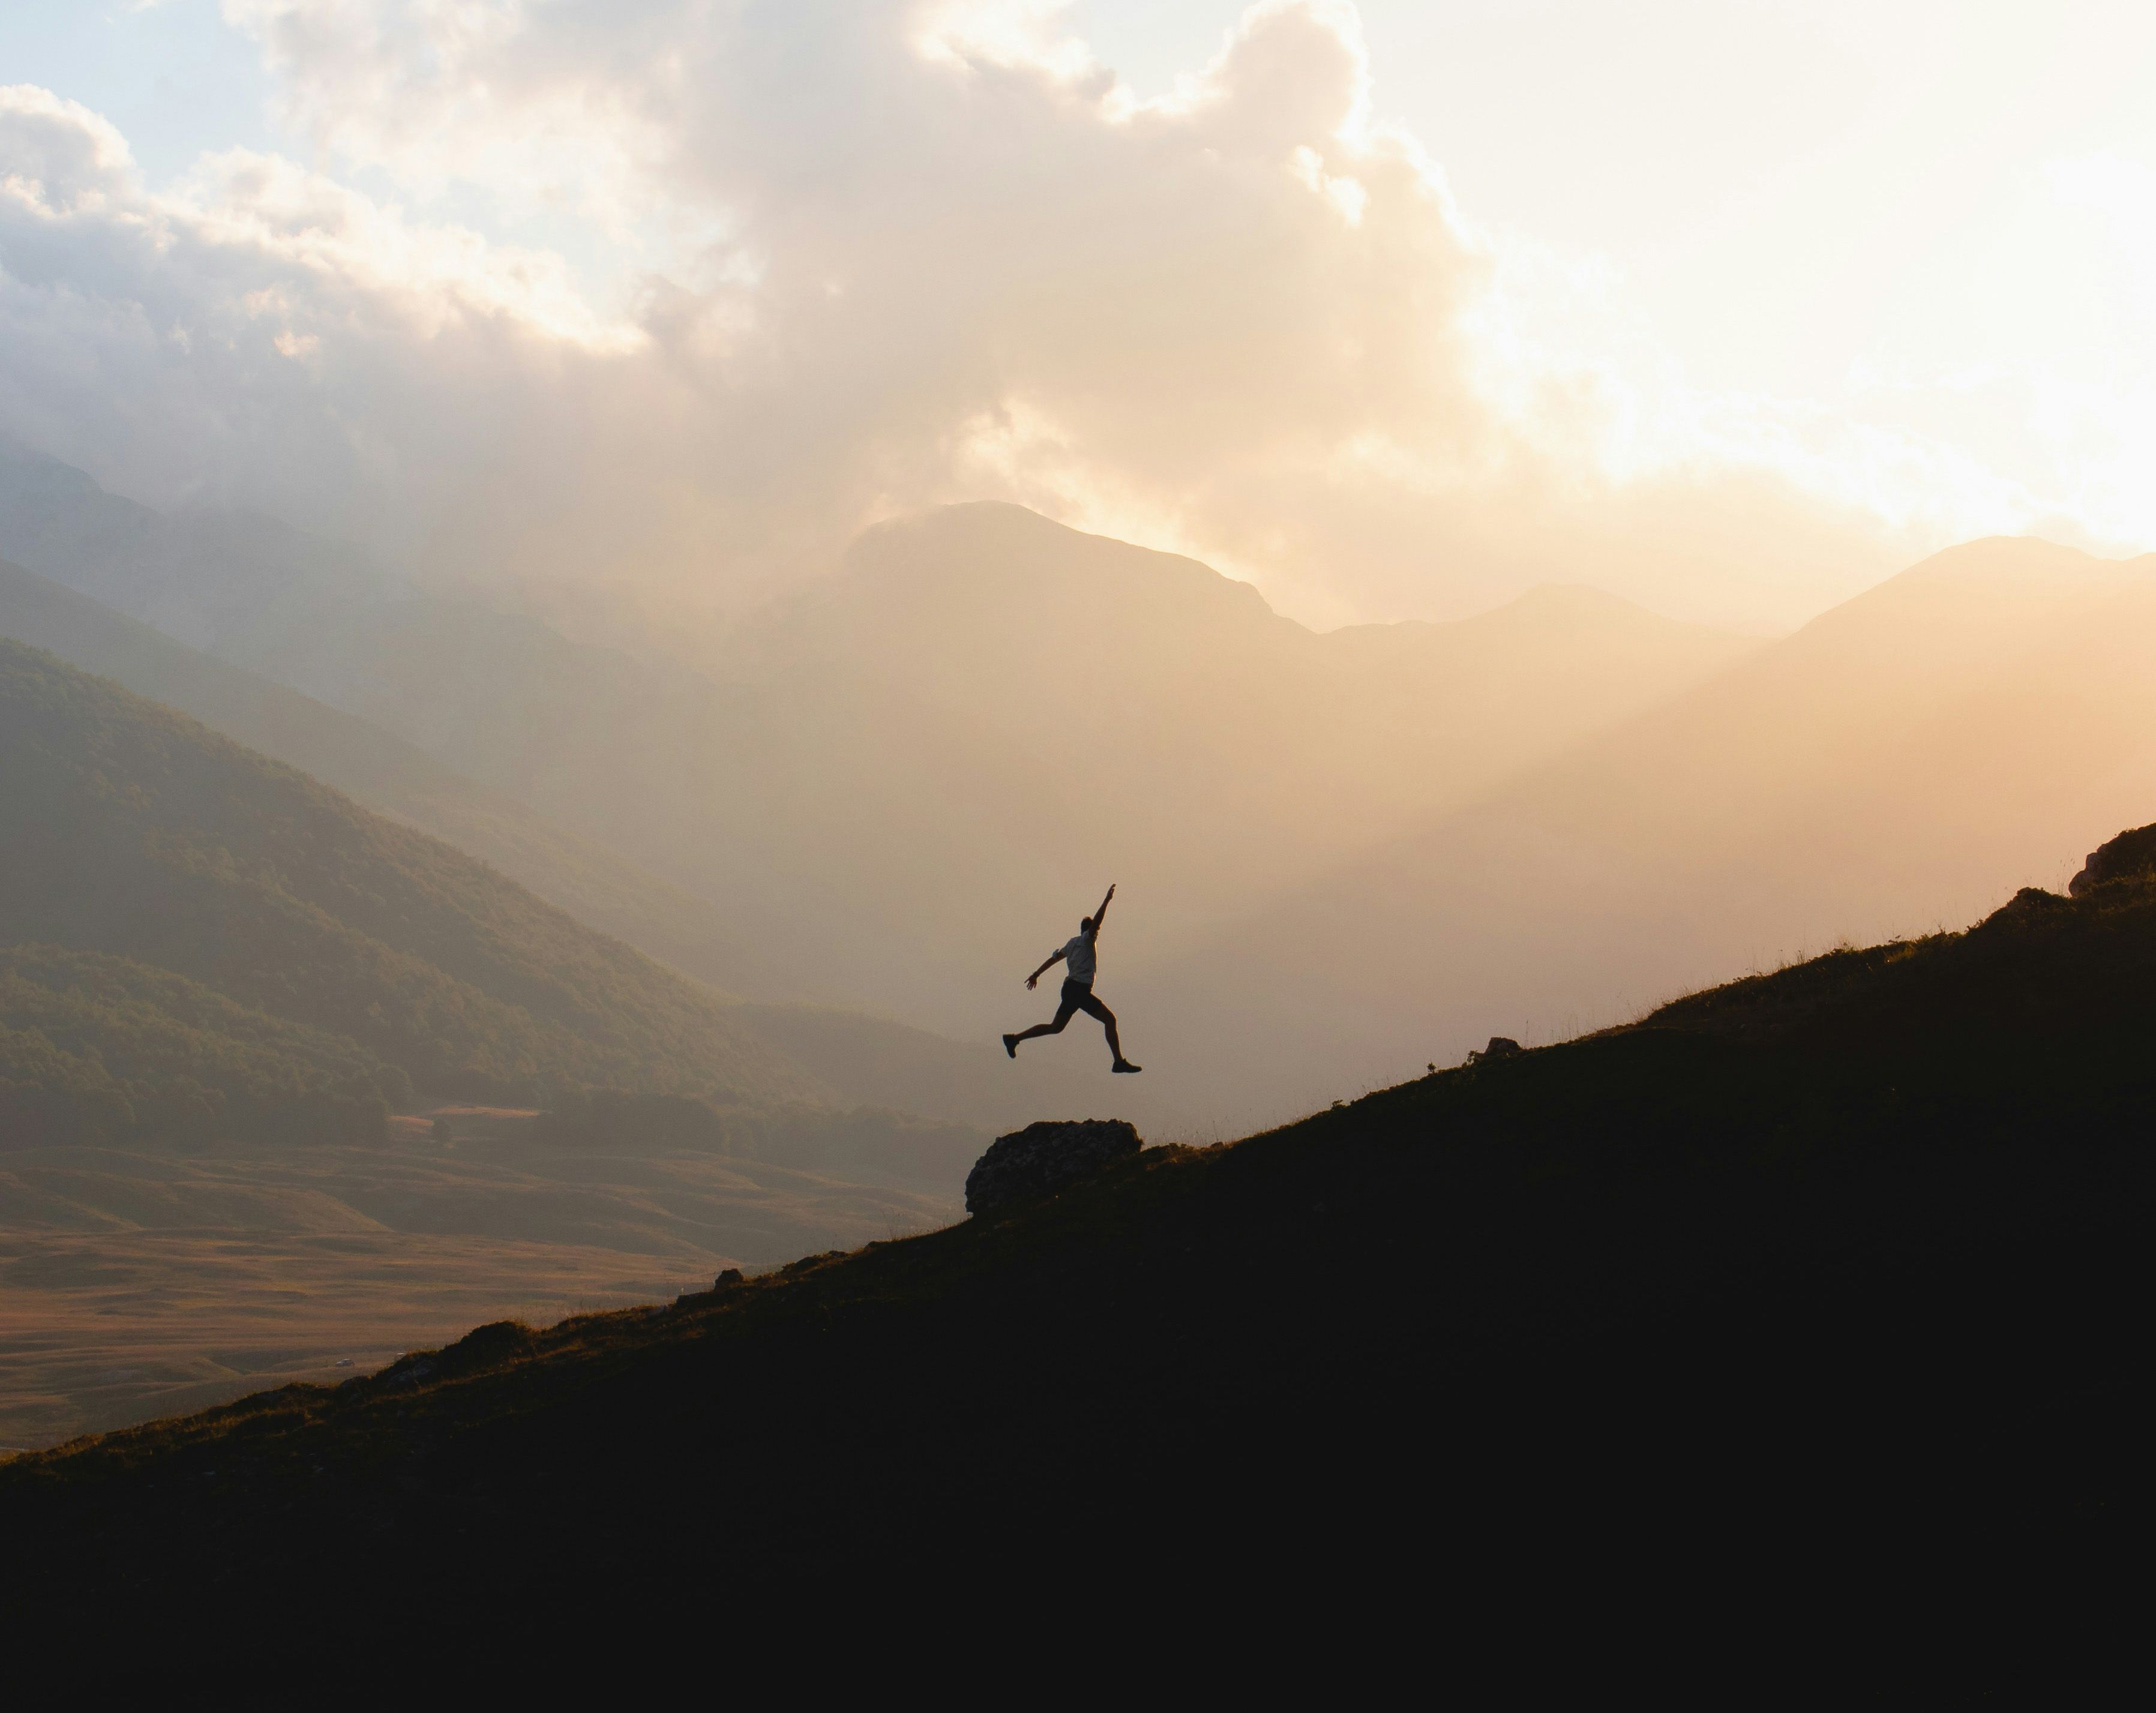 Silhouette of a man jumping over a rock on a hillside